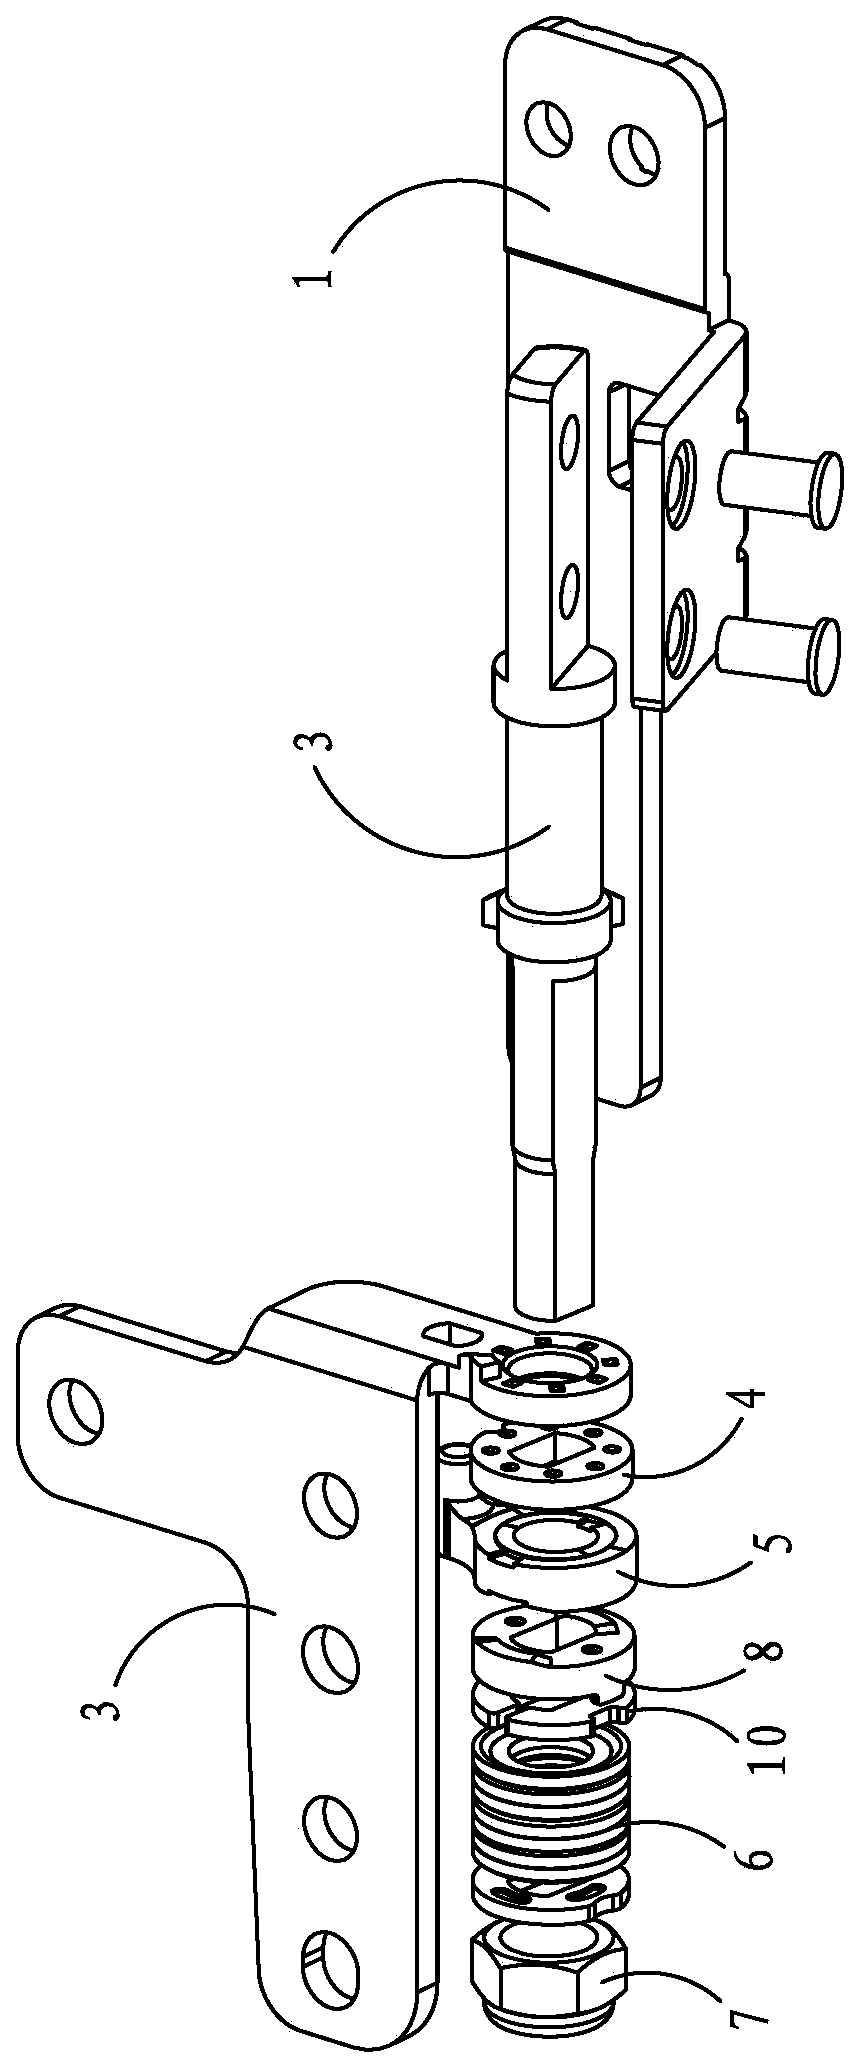 Pivot device suitable for single-hand operation